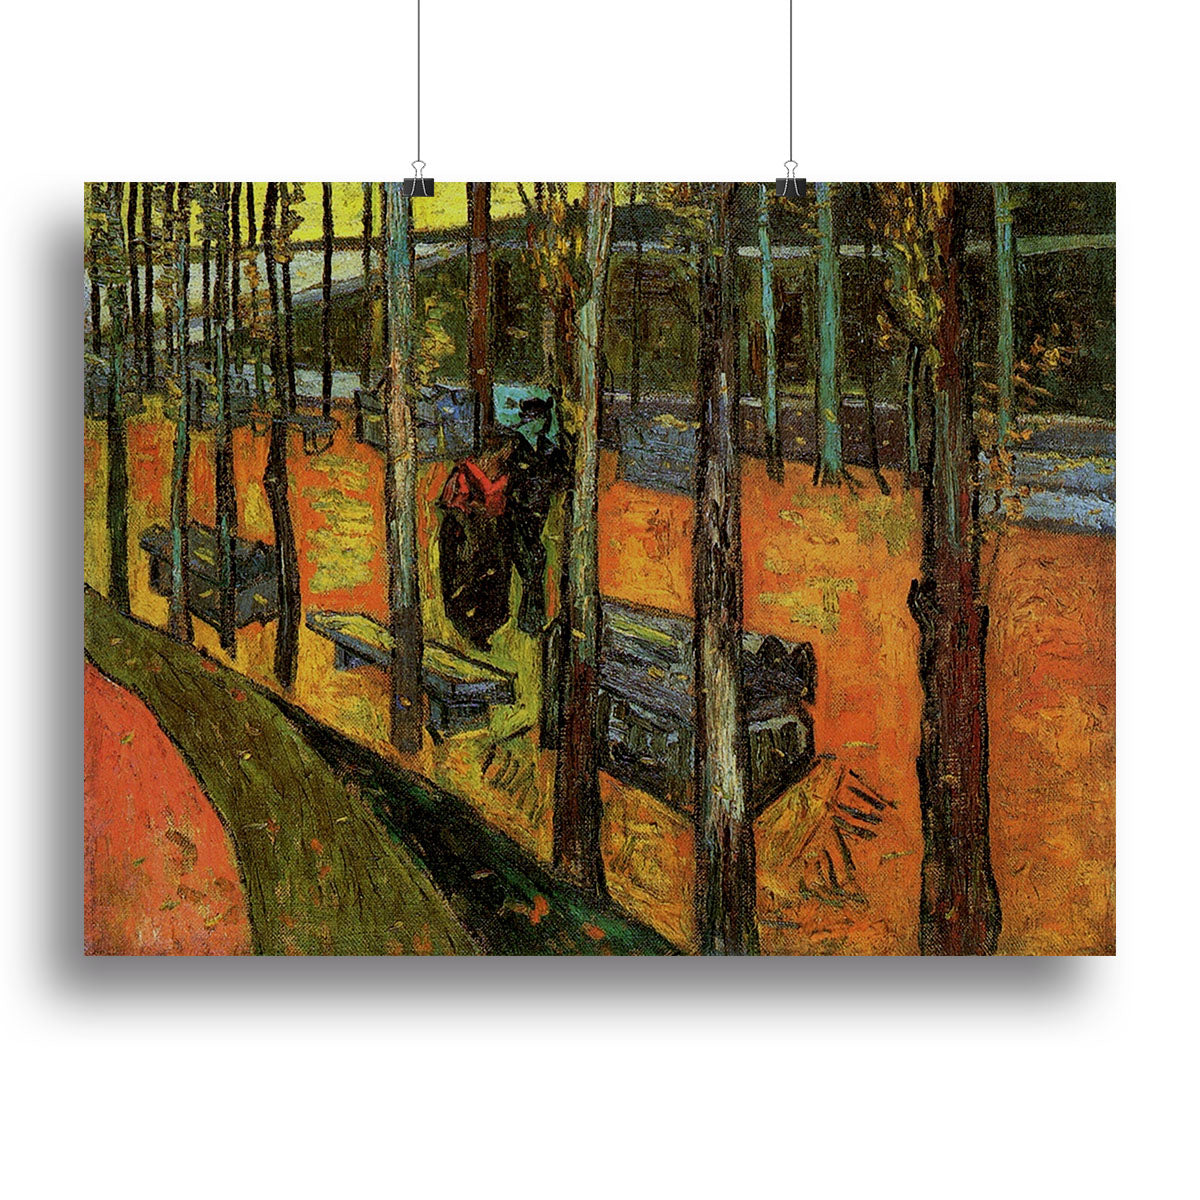 Les Alyscamps 2 by Van Gogh Canvas Print or Poster - Canvas Art Rocks - 2